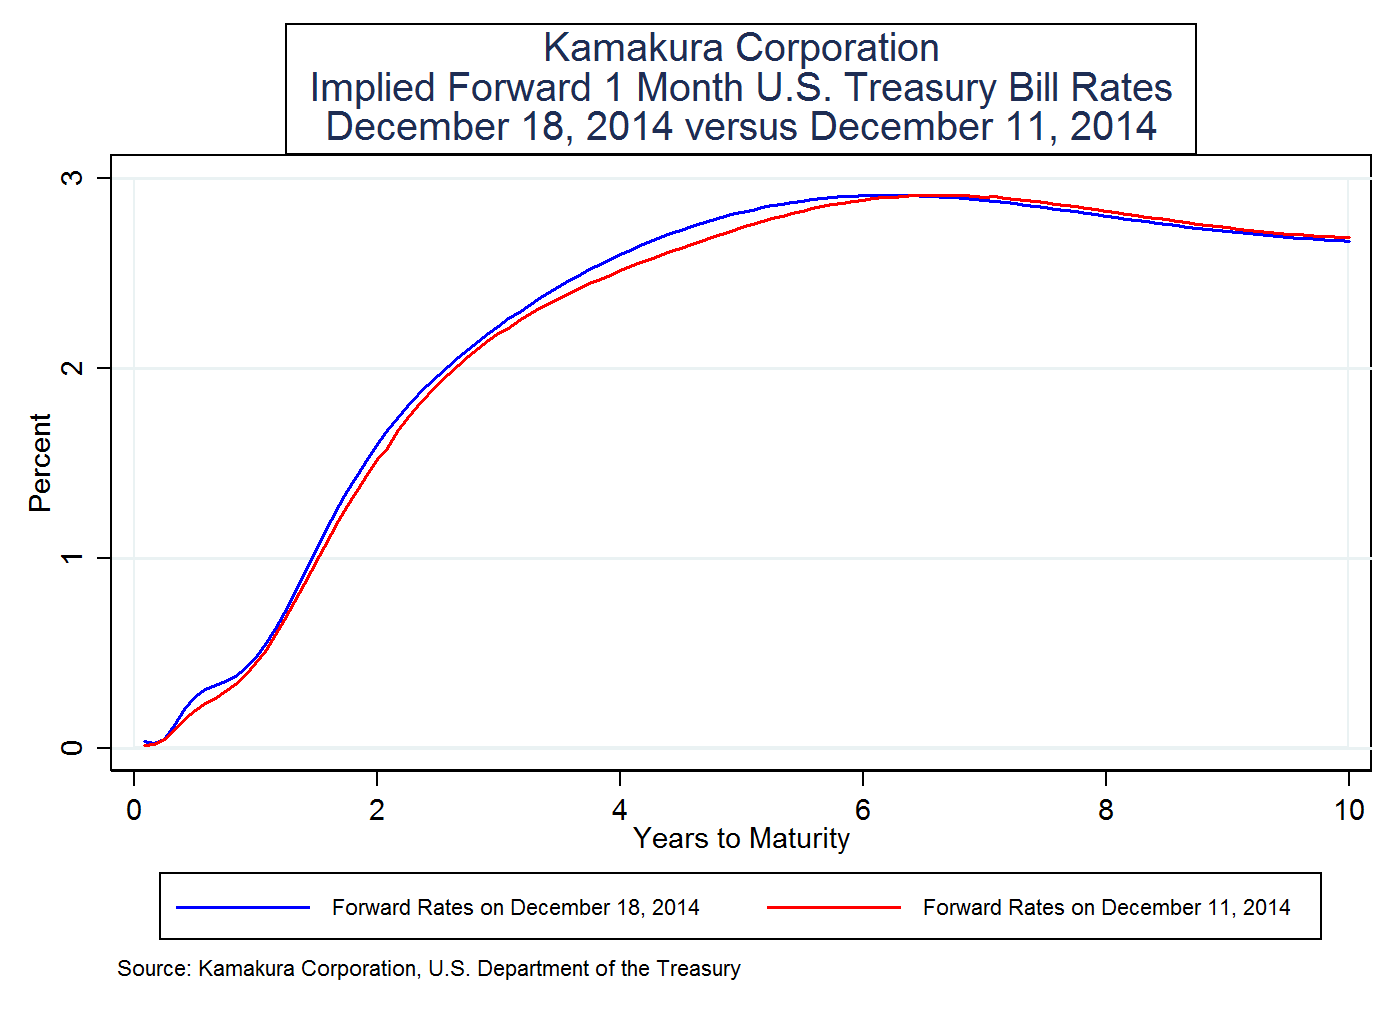 Implied Forward T Bill Rates Rise 009 In 2019 And Fall 002 From